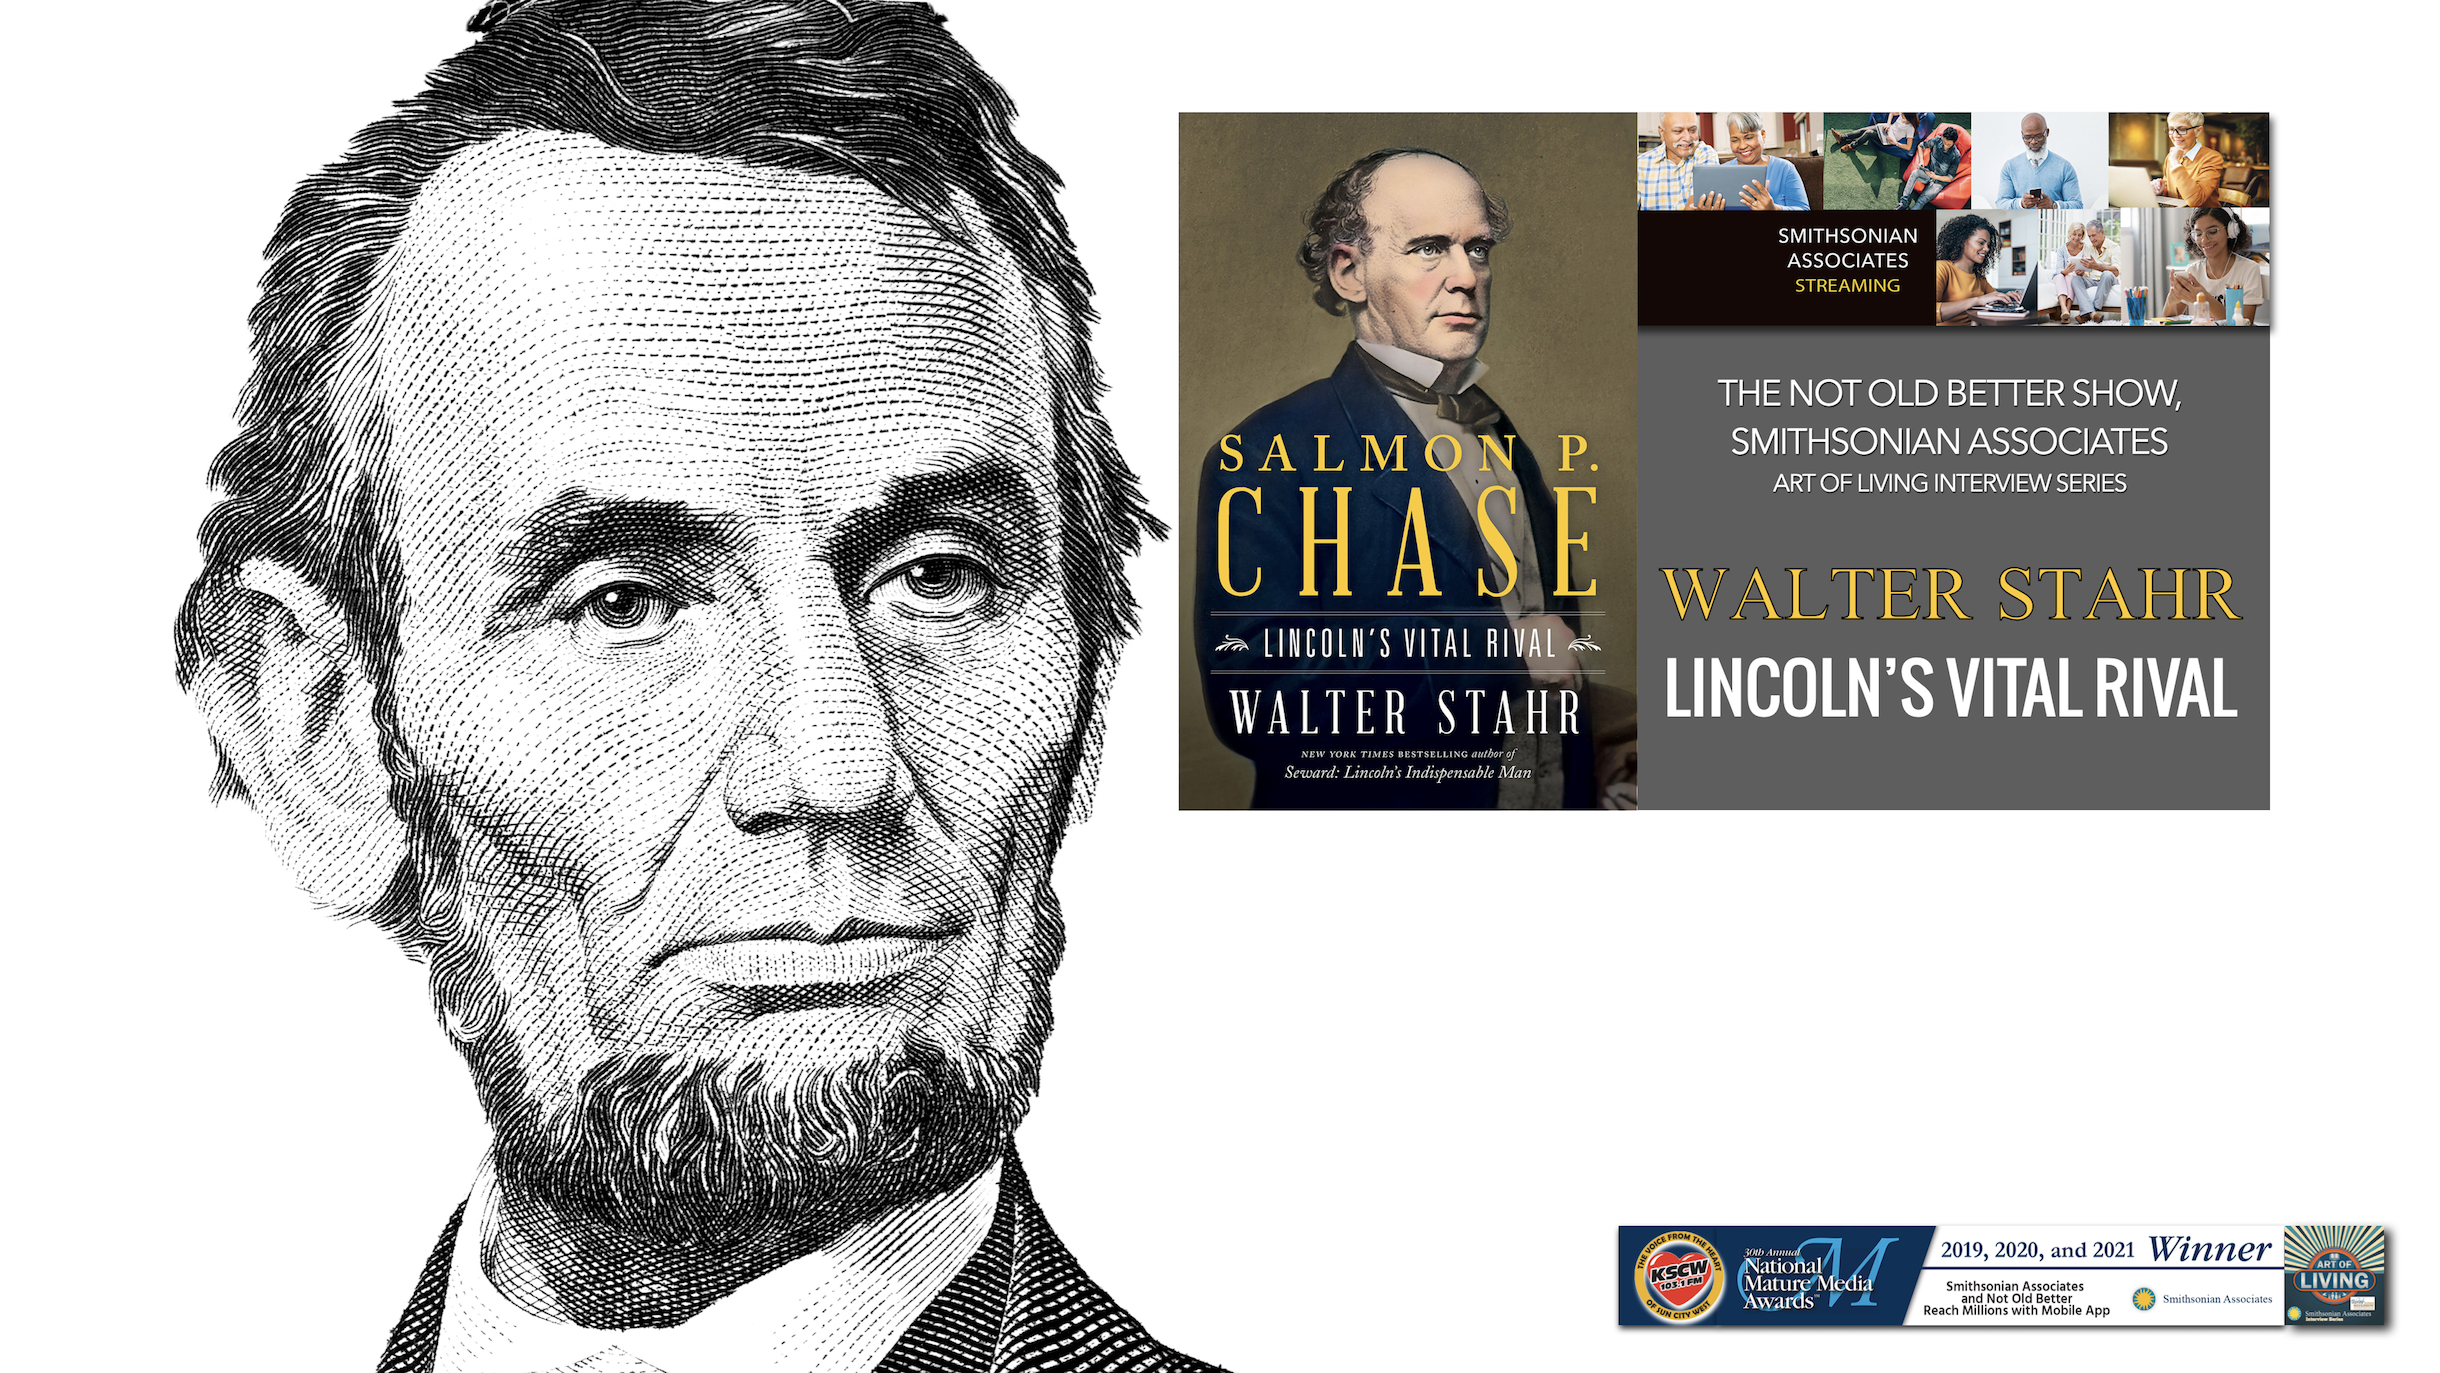 Salmon P. Chase: Lincoln’s Vital Rival – Walter Stahr